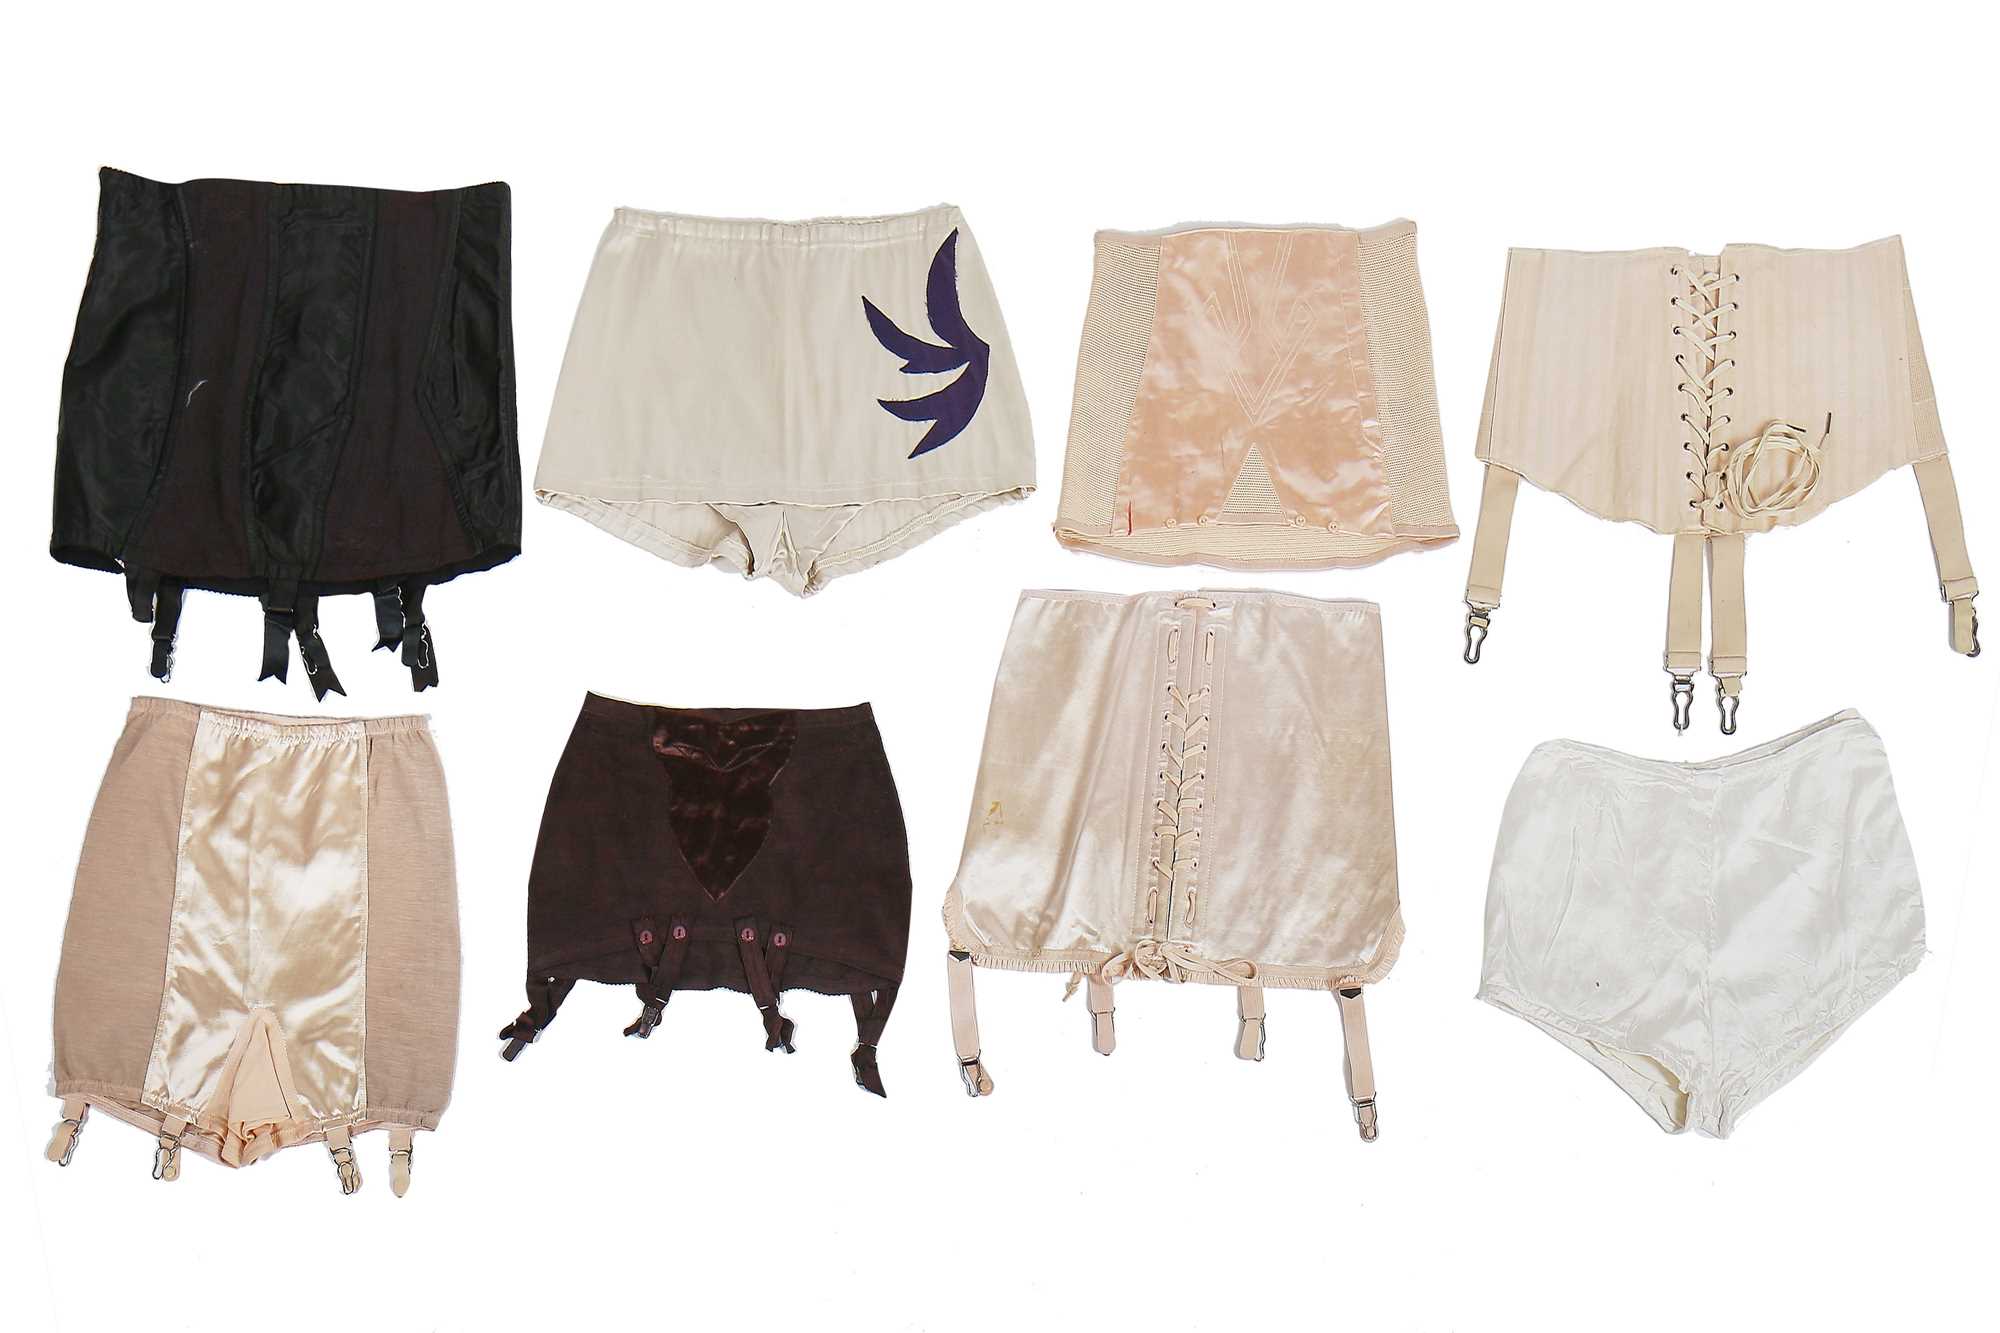 Lot 63 - A group of bras and girdles, dating from the 1930s to the 1960s